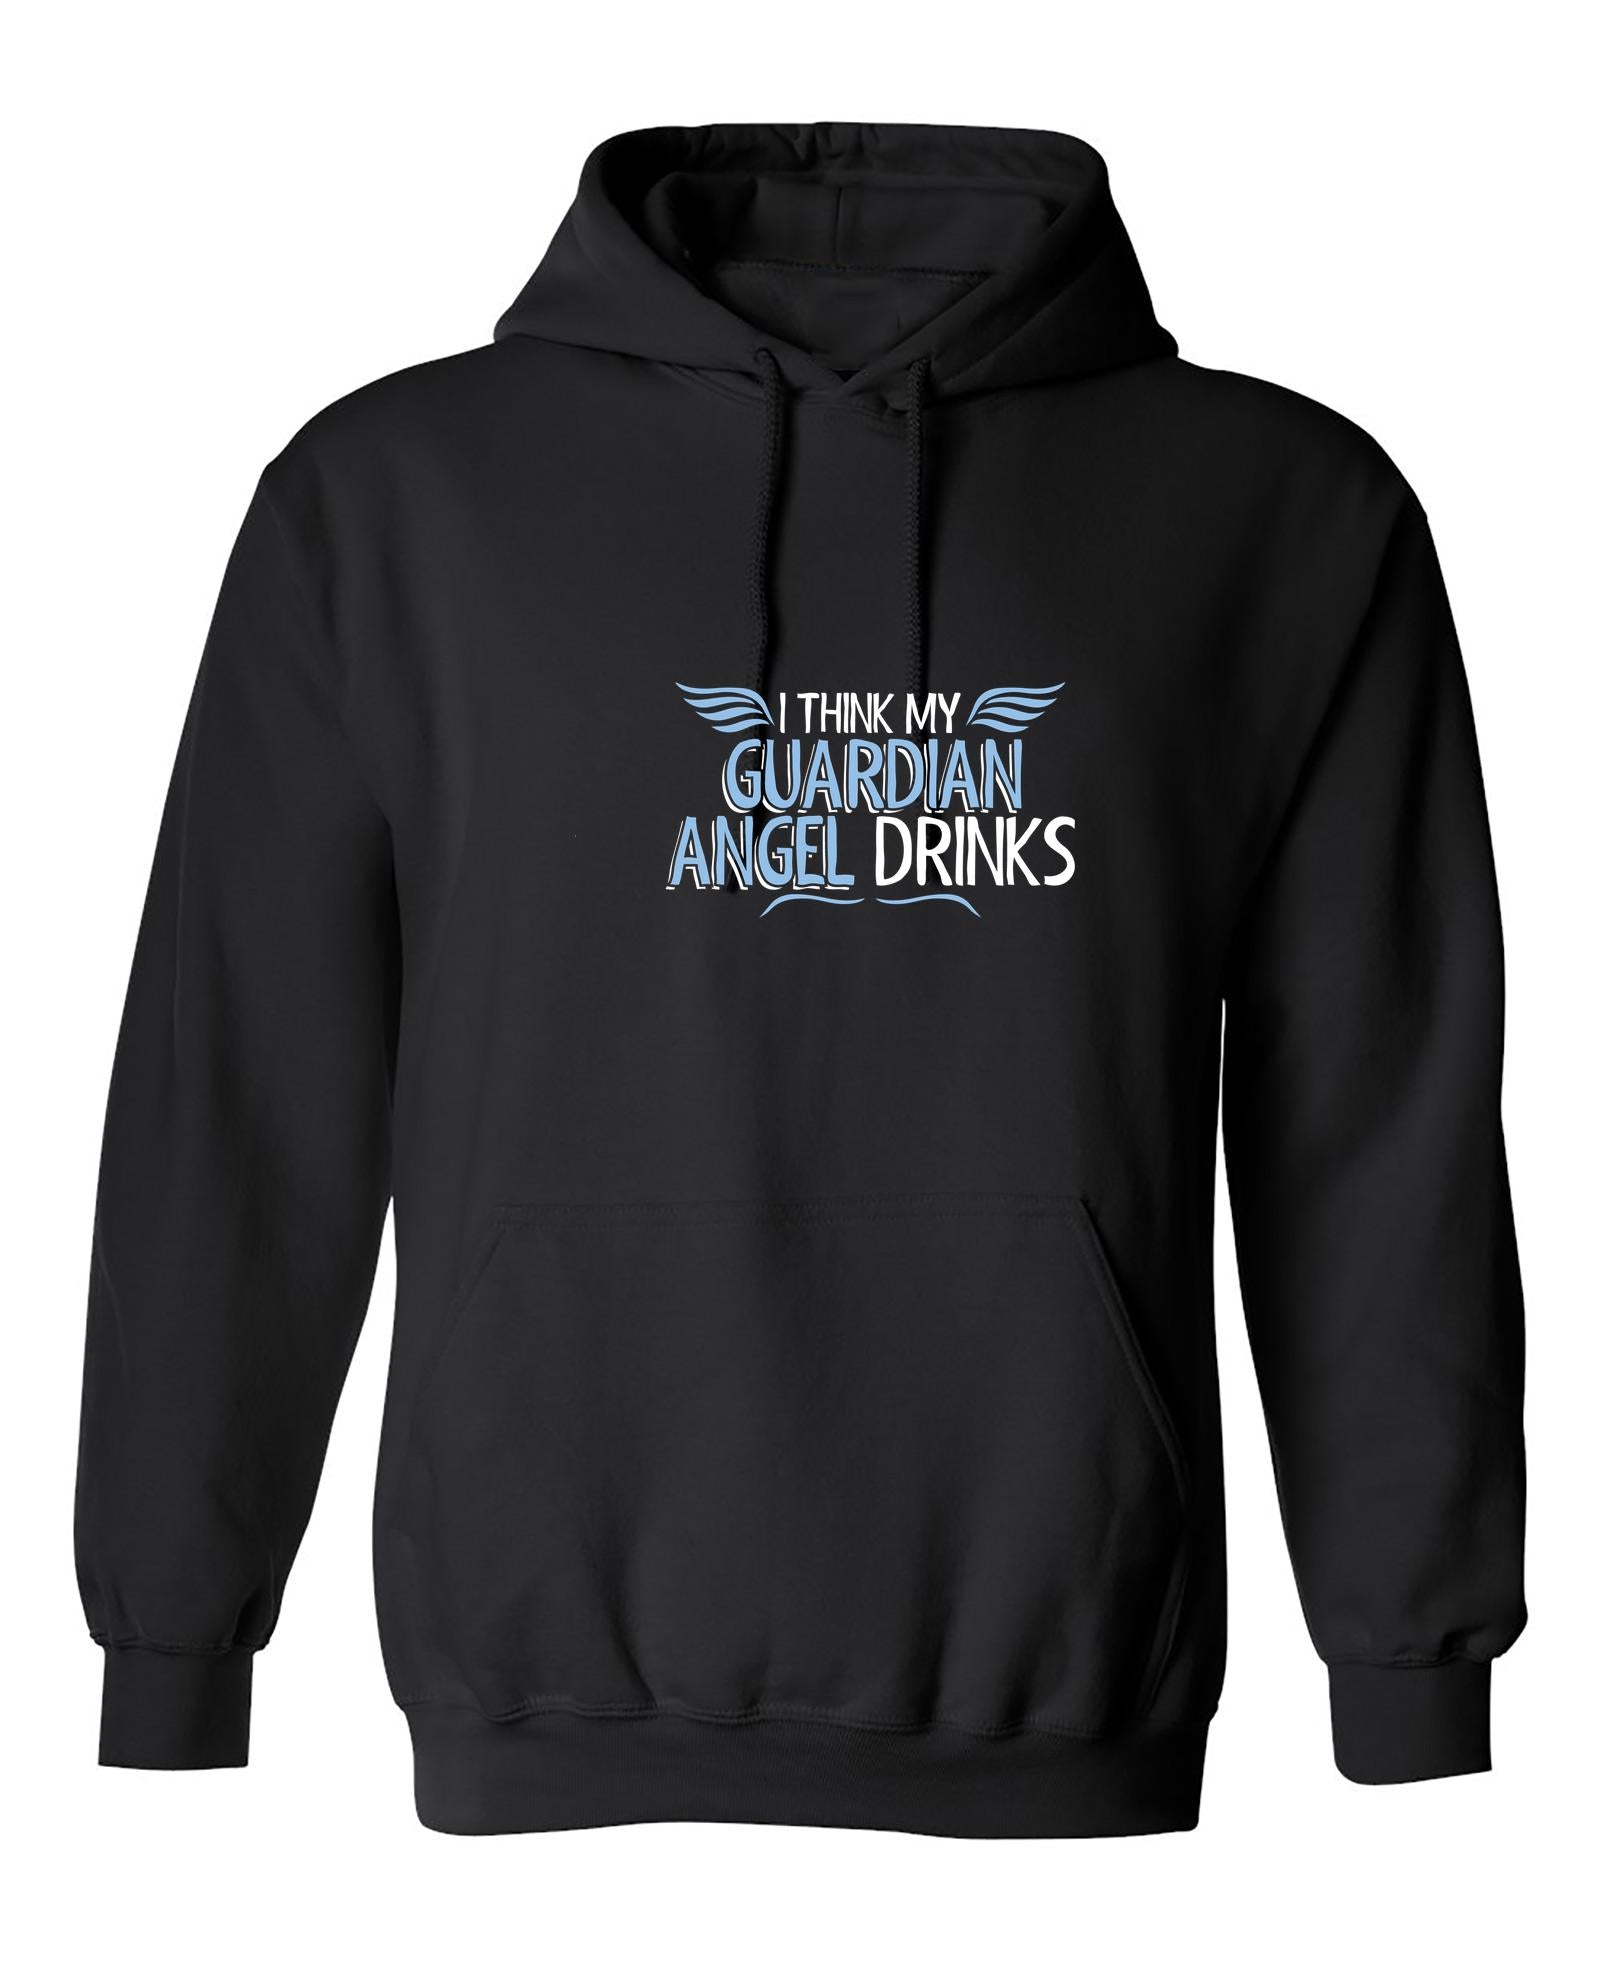 Funny T-Shirts design "I Think My Guardian Angel Drinks"